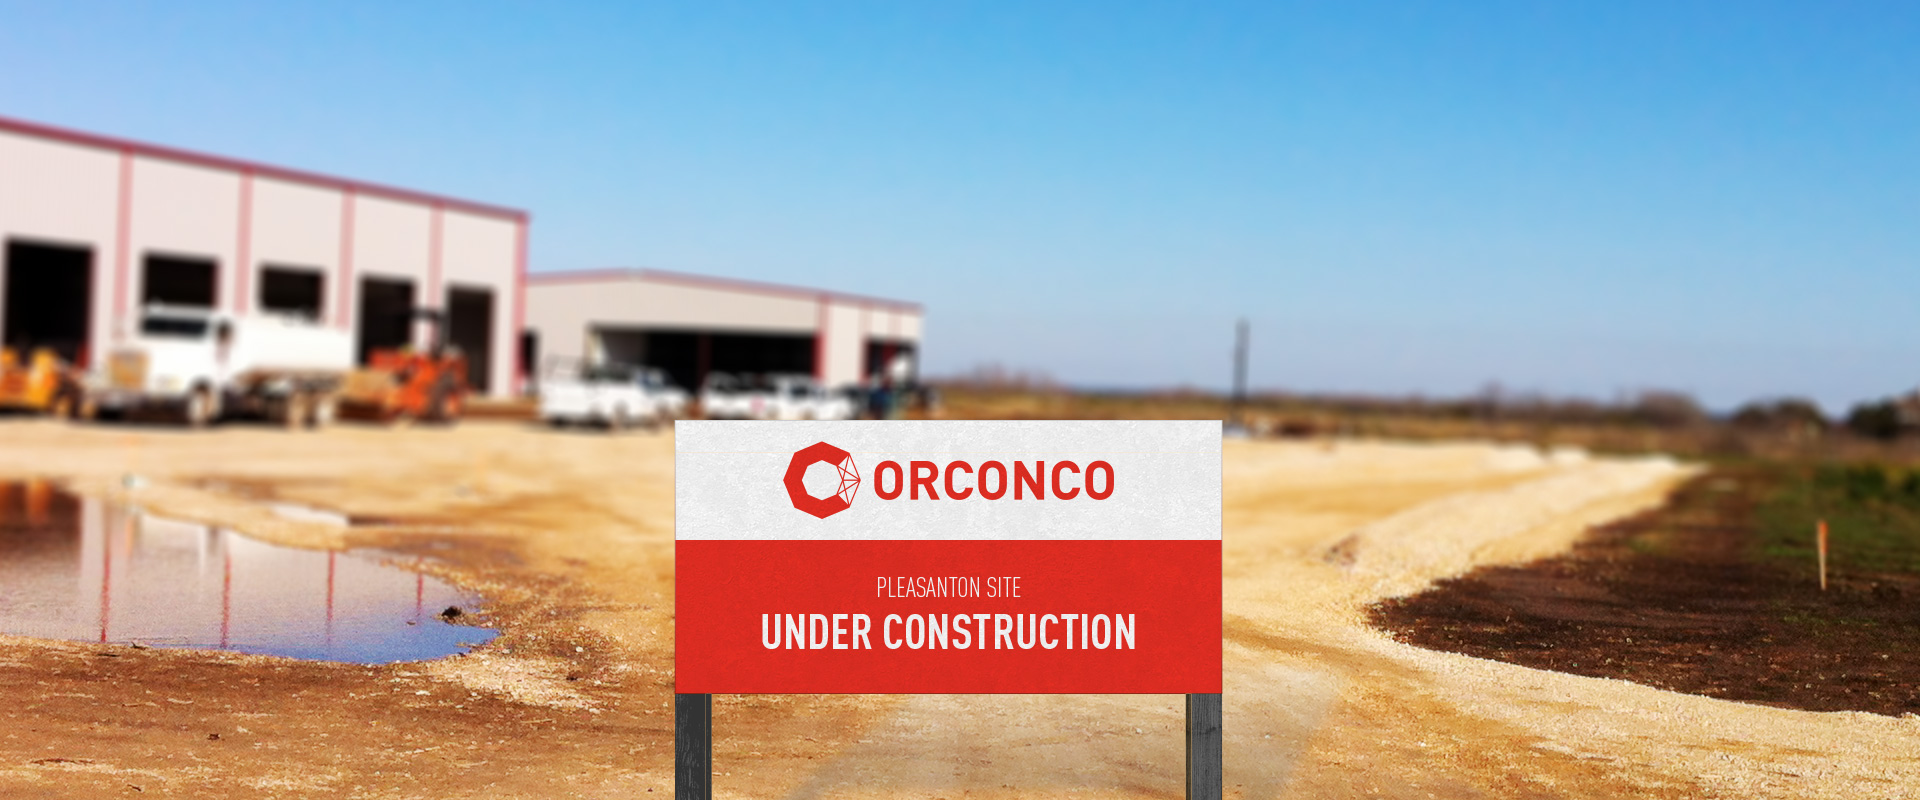 Signage design concept for Orconco 